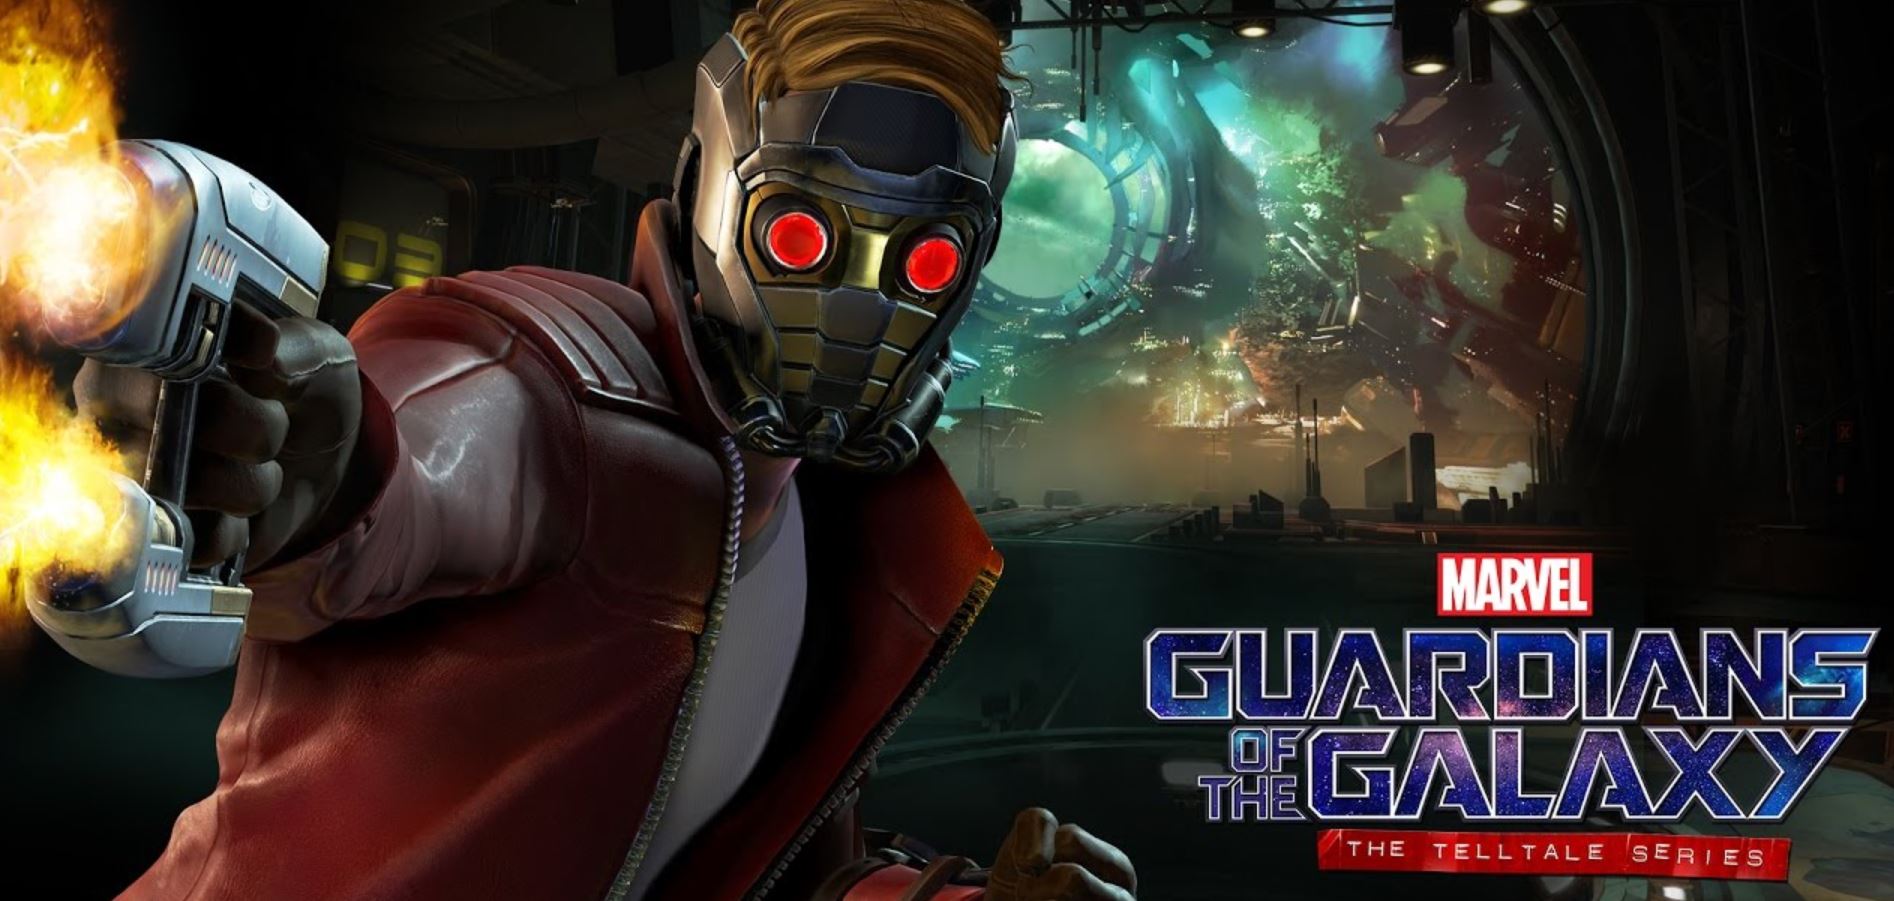 Guardians of the galaxy telltale story game